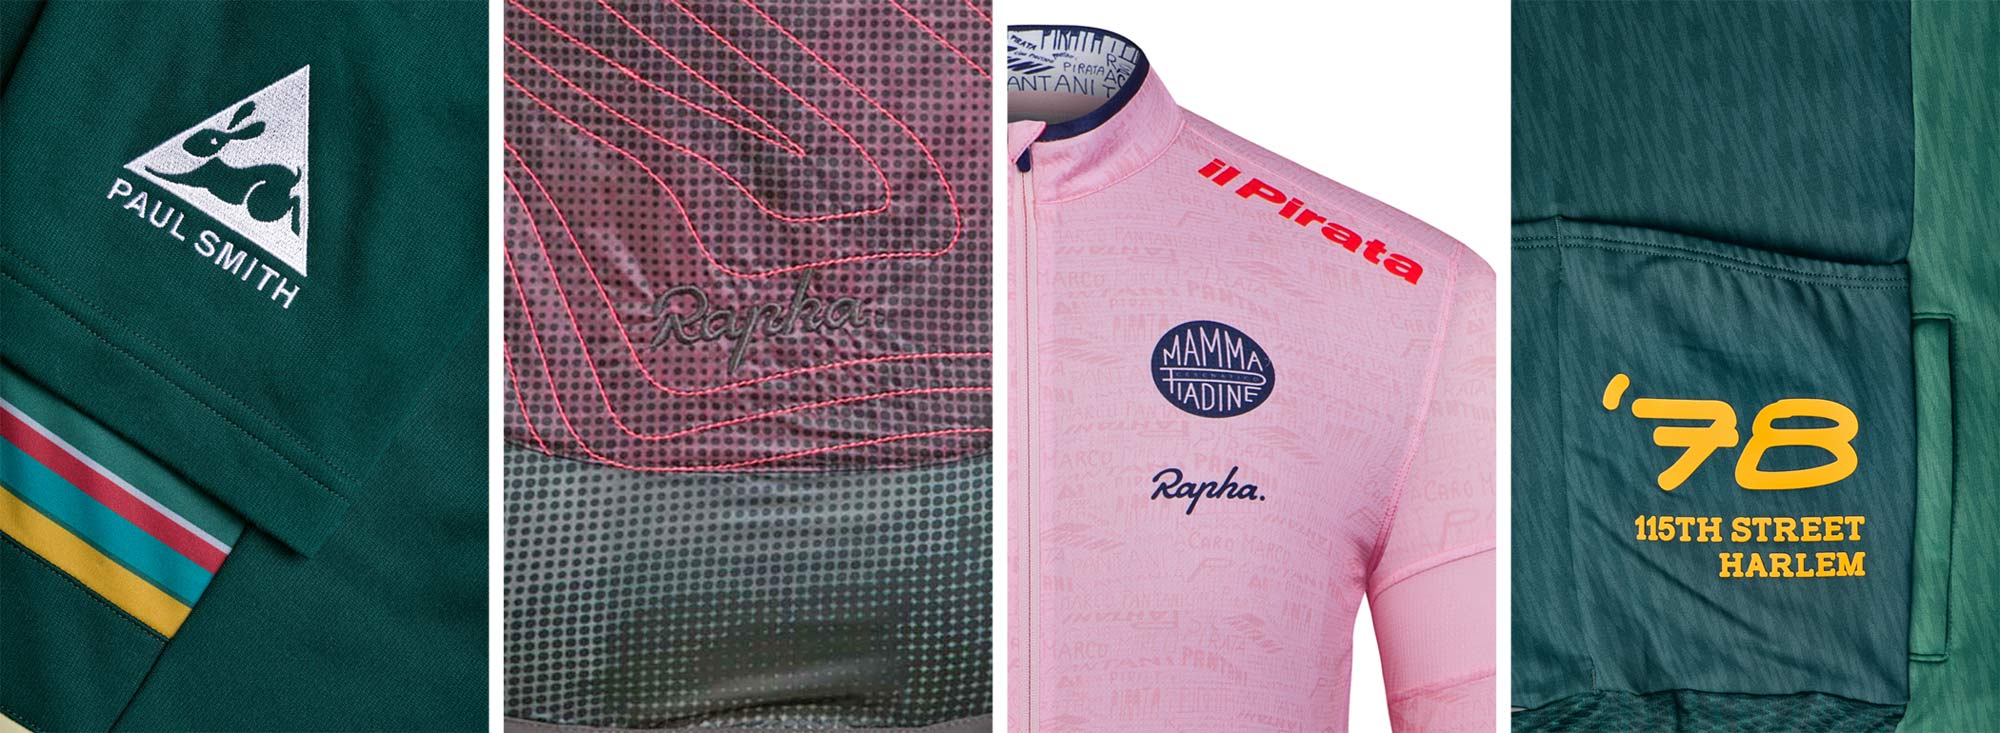 Rapha teases 2019 riding gear - all-road shoes, cargo shorts & more